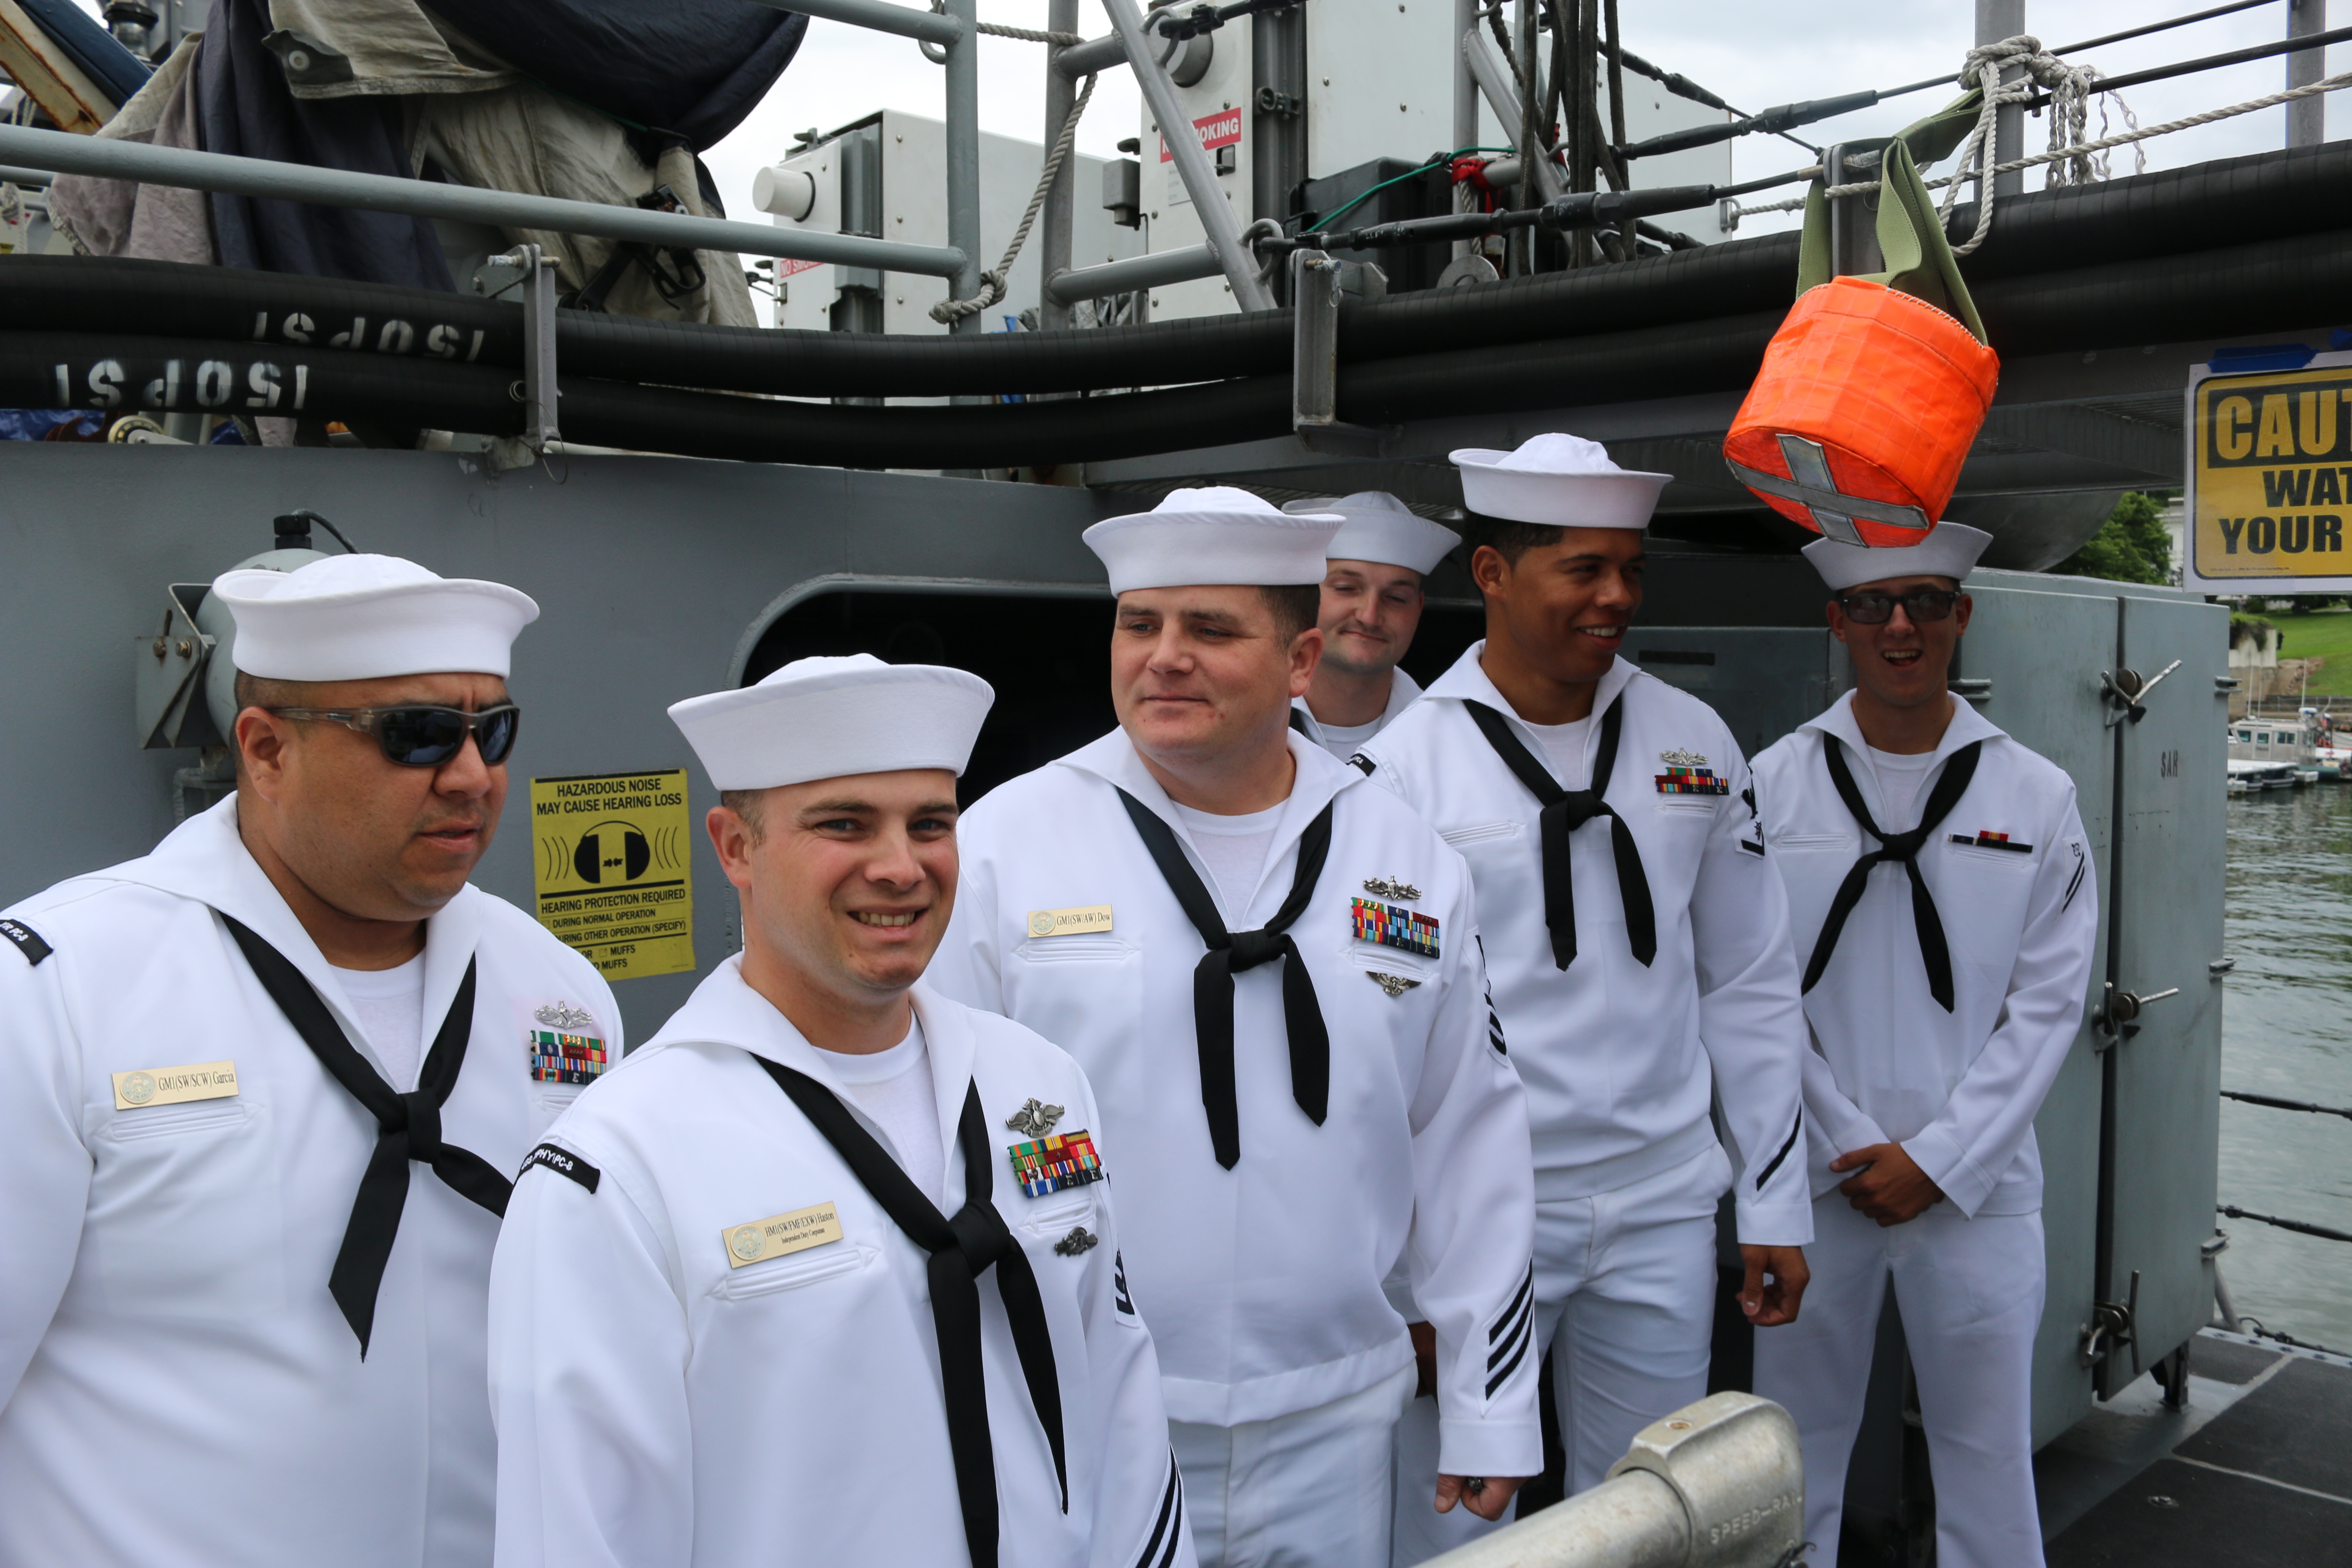 USS Zephyr crew greats a few visitors before going to NYC